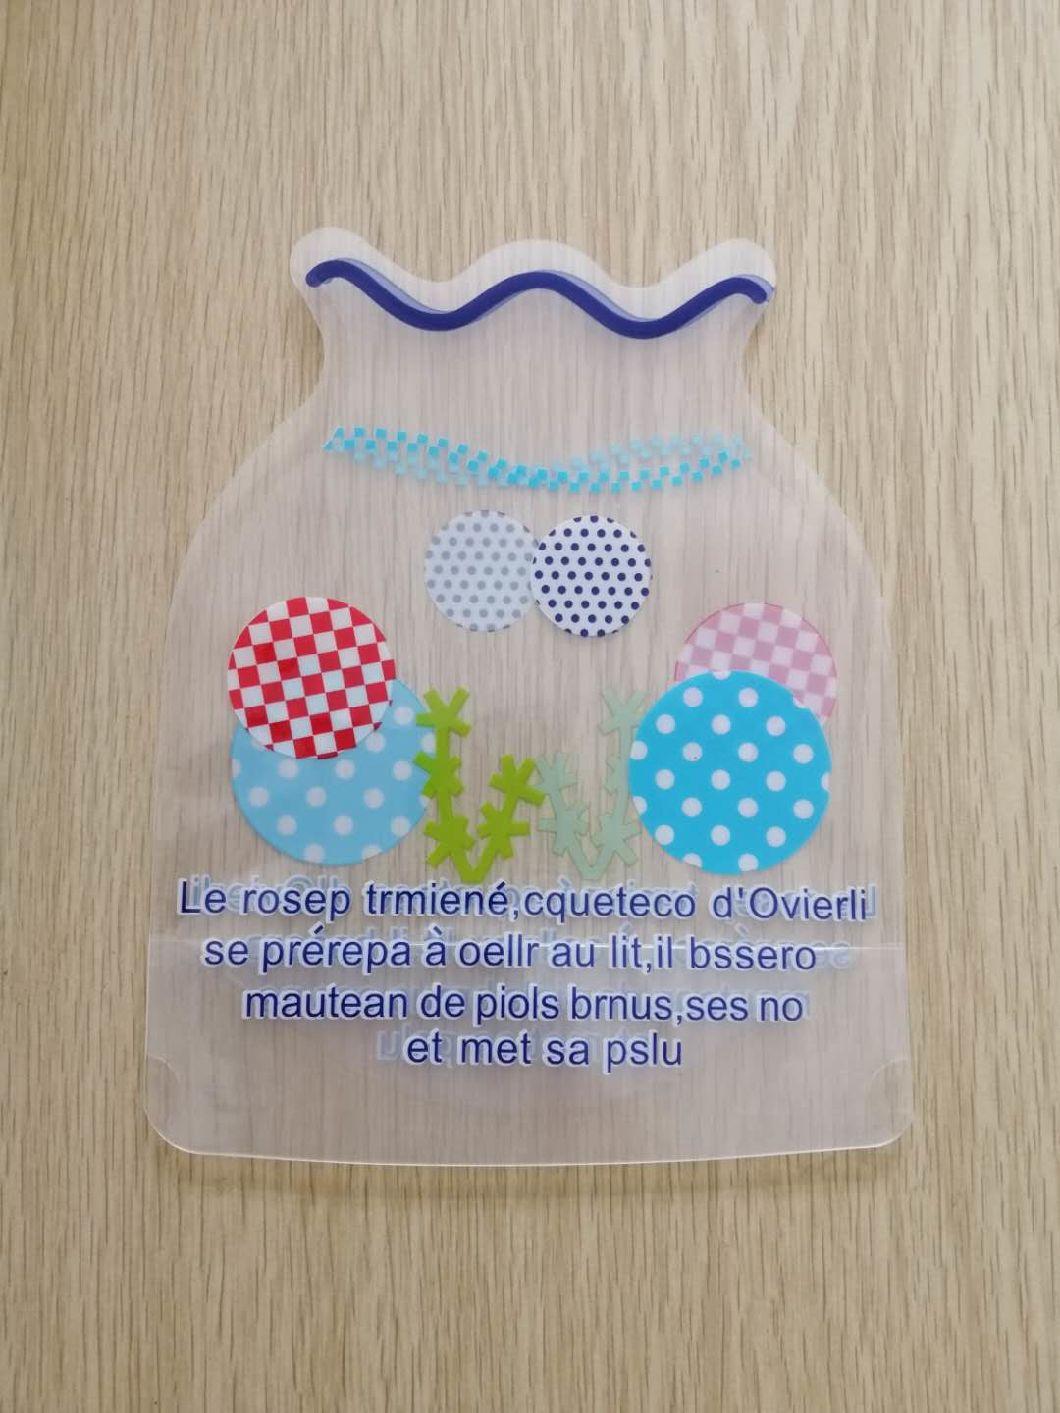 Printed Plastic Special Shape Bag Used for Pet Snacks or Human Food